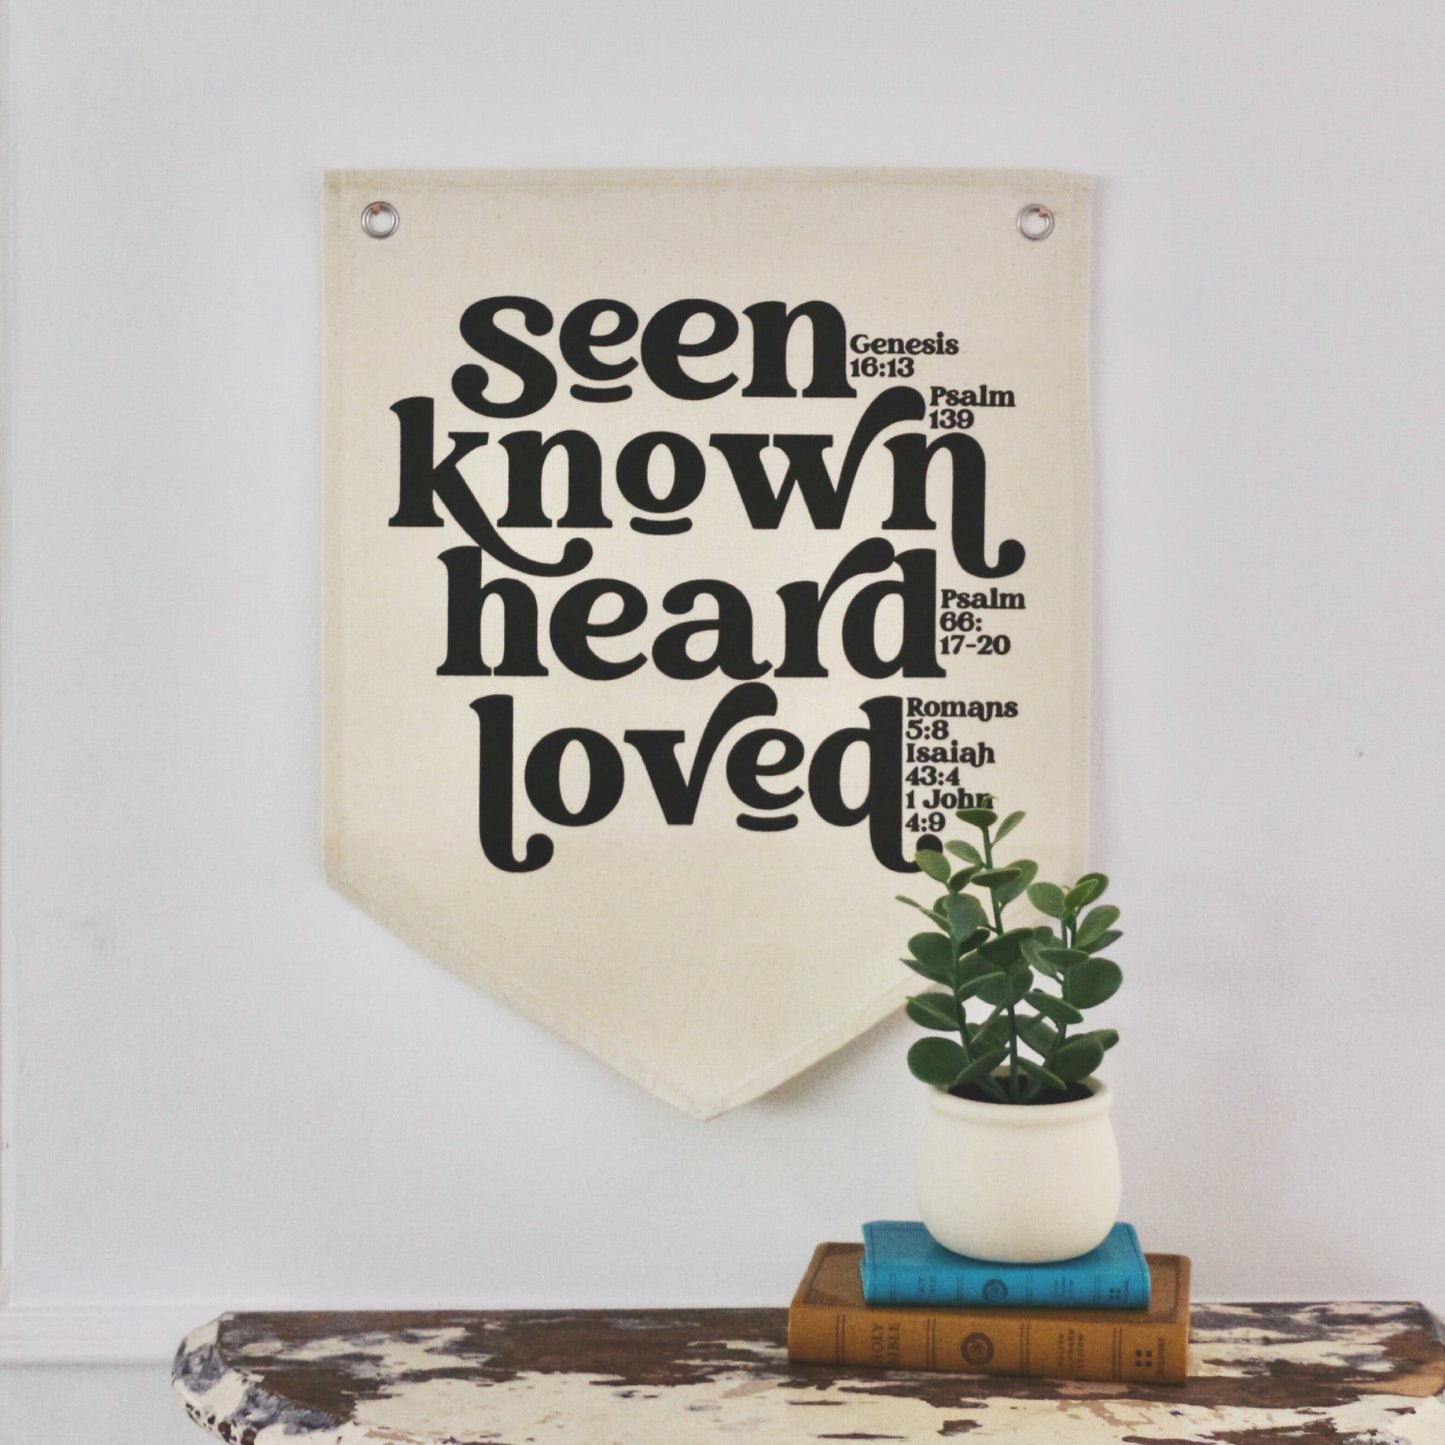 seen. known. heard. loved. natural canvas wall flag